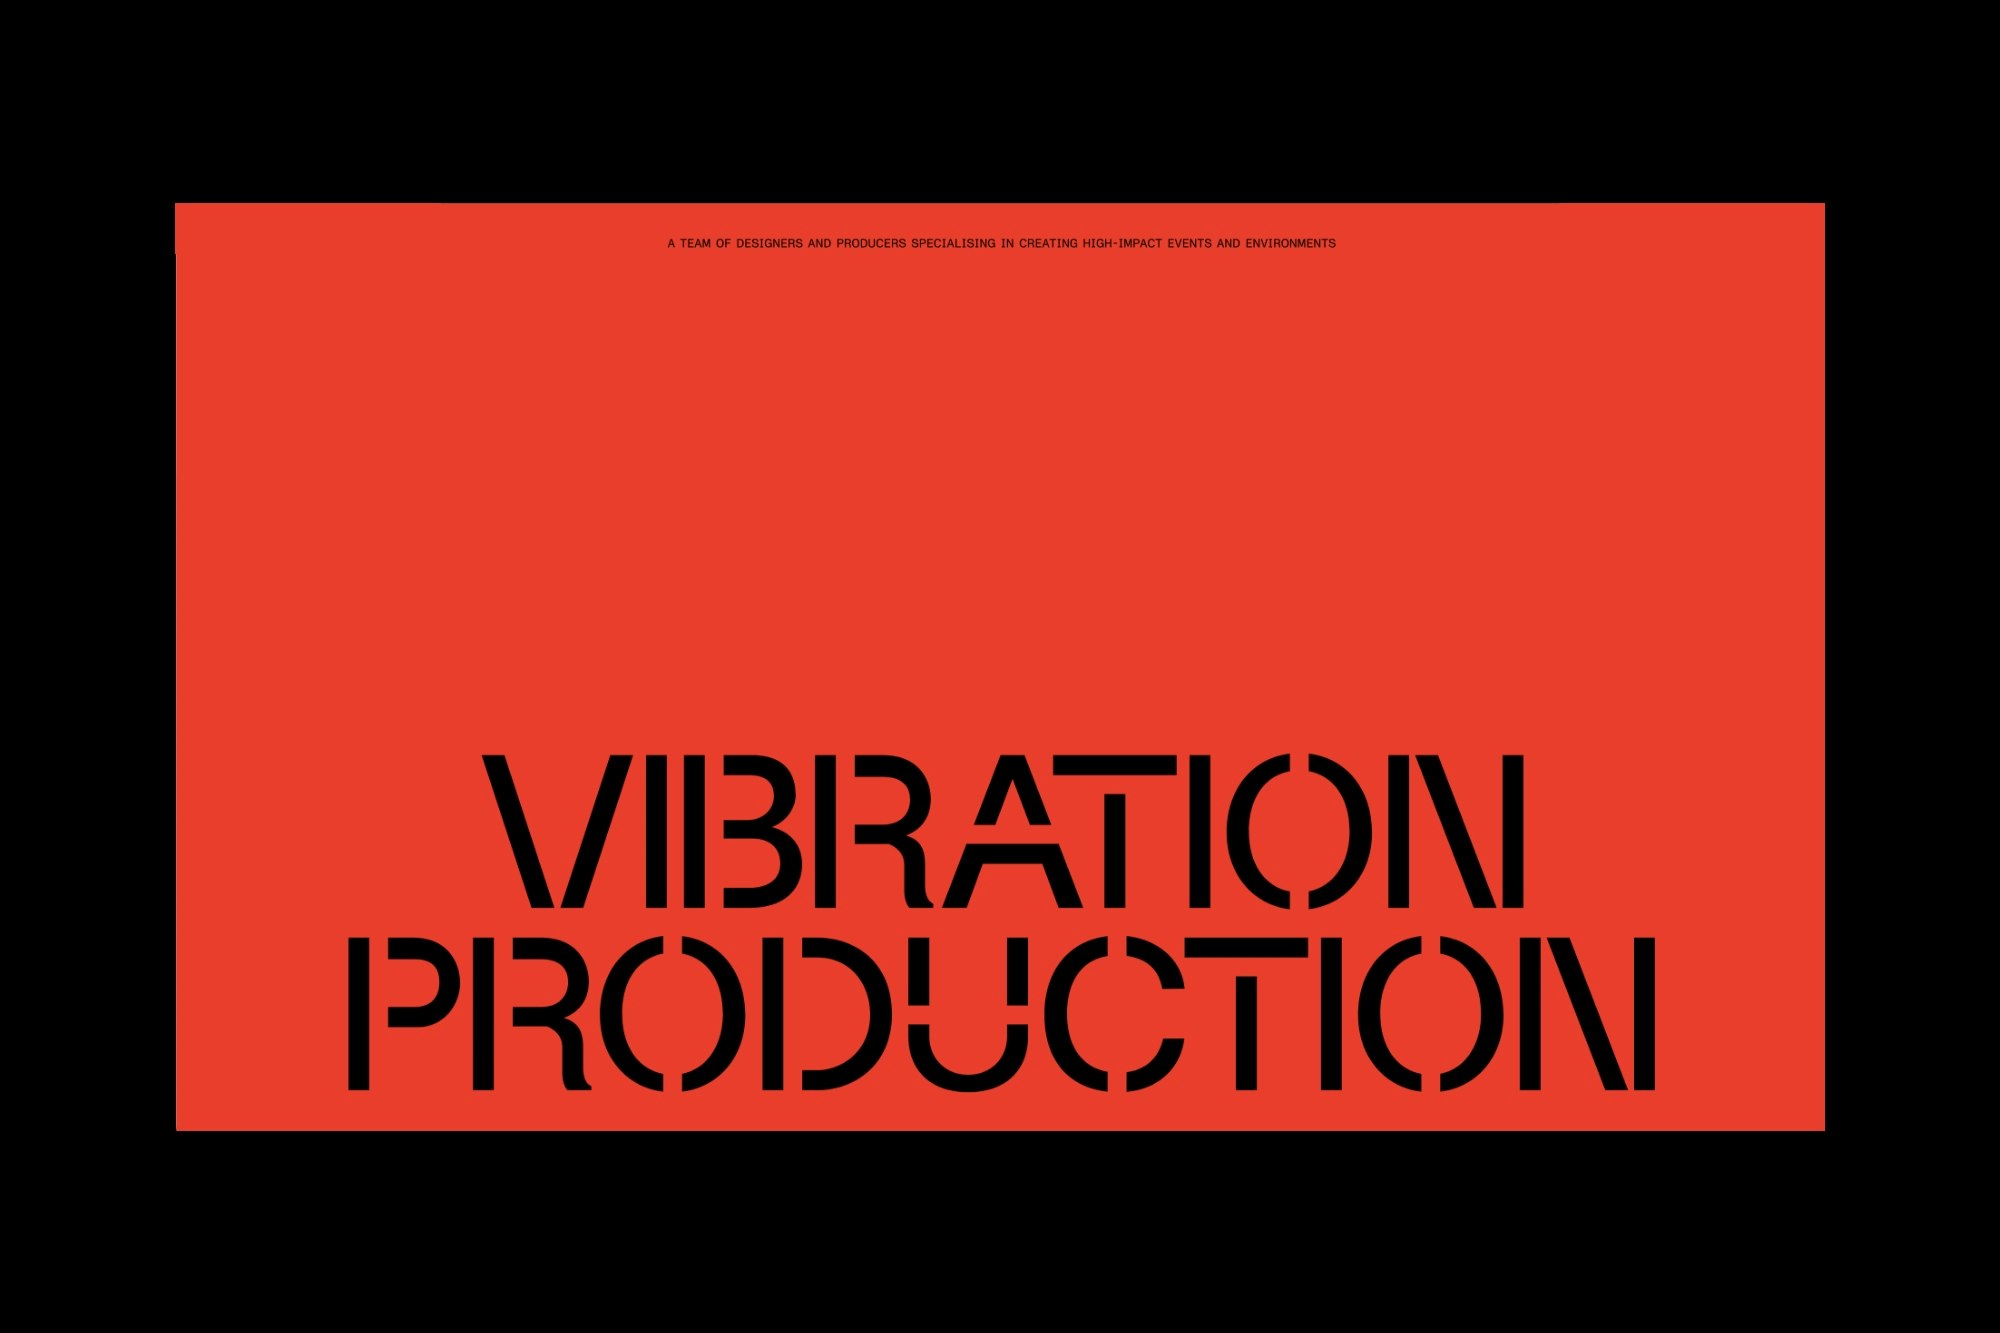 Vibration Production website featured on SiteInspire